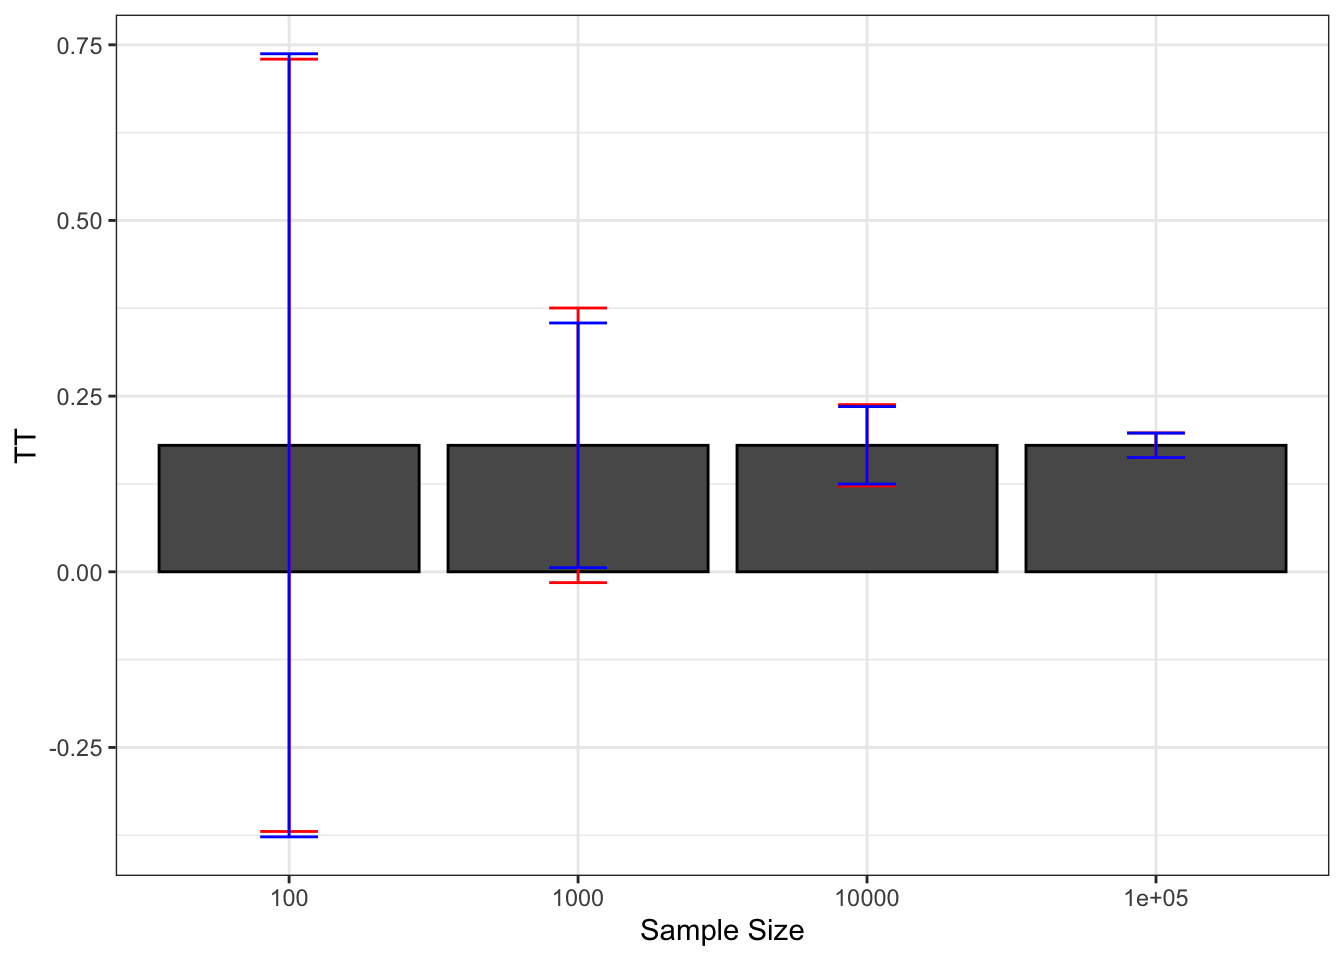 Average bootstrapped approximations of sampling noise over replications of samples of different sizes (true sampling noise in red)